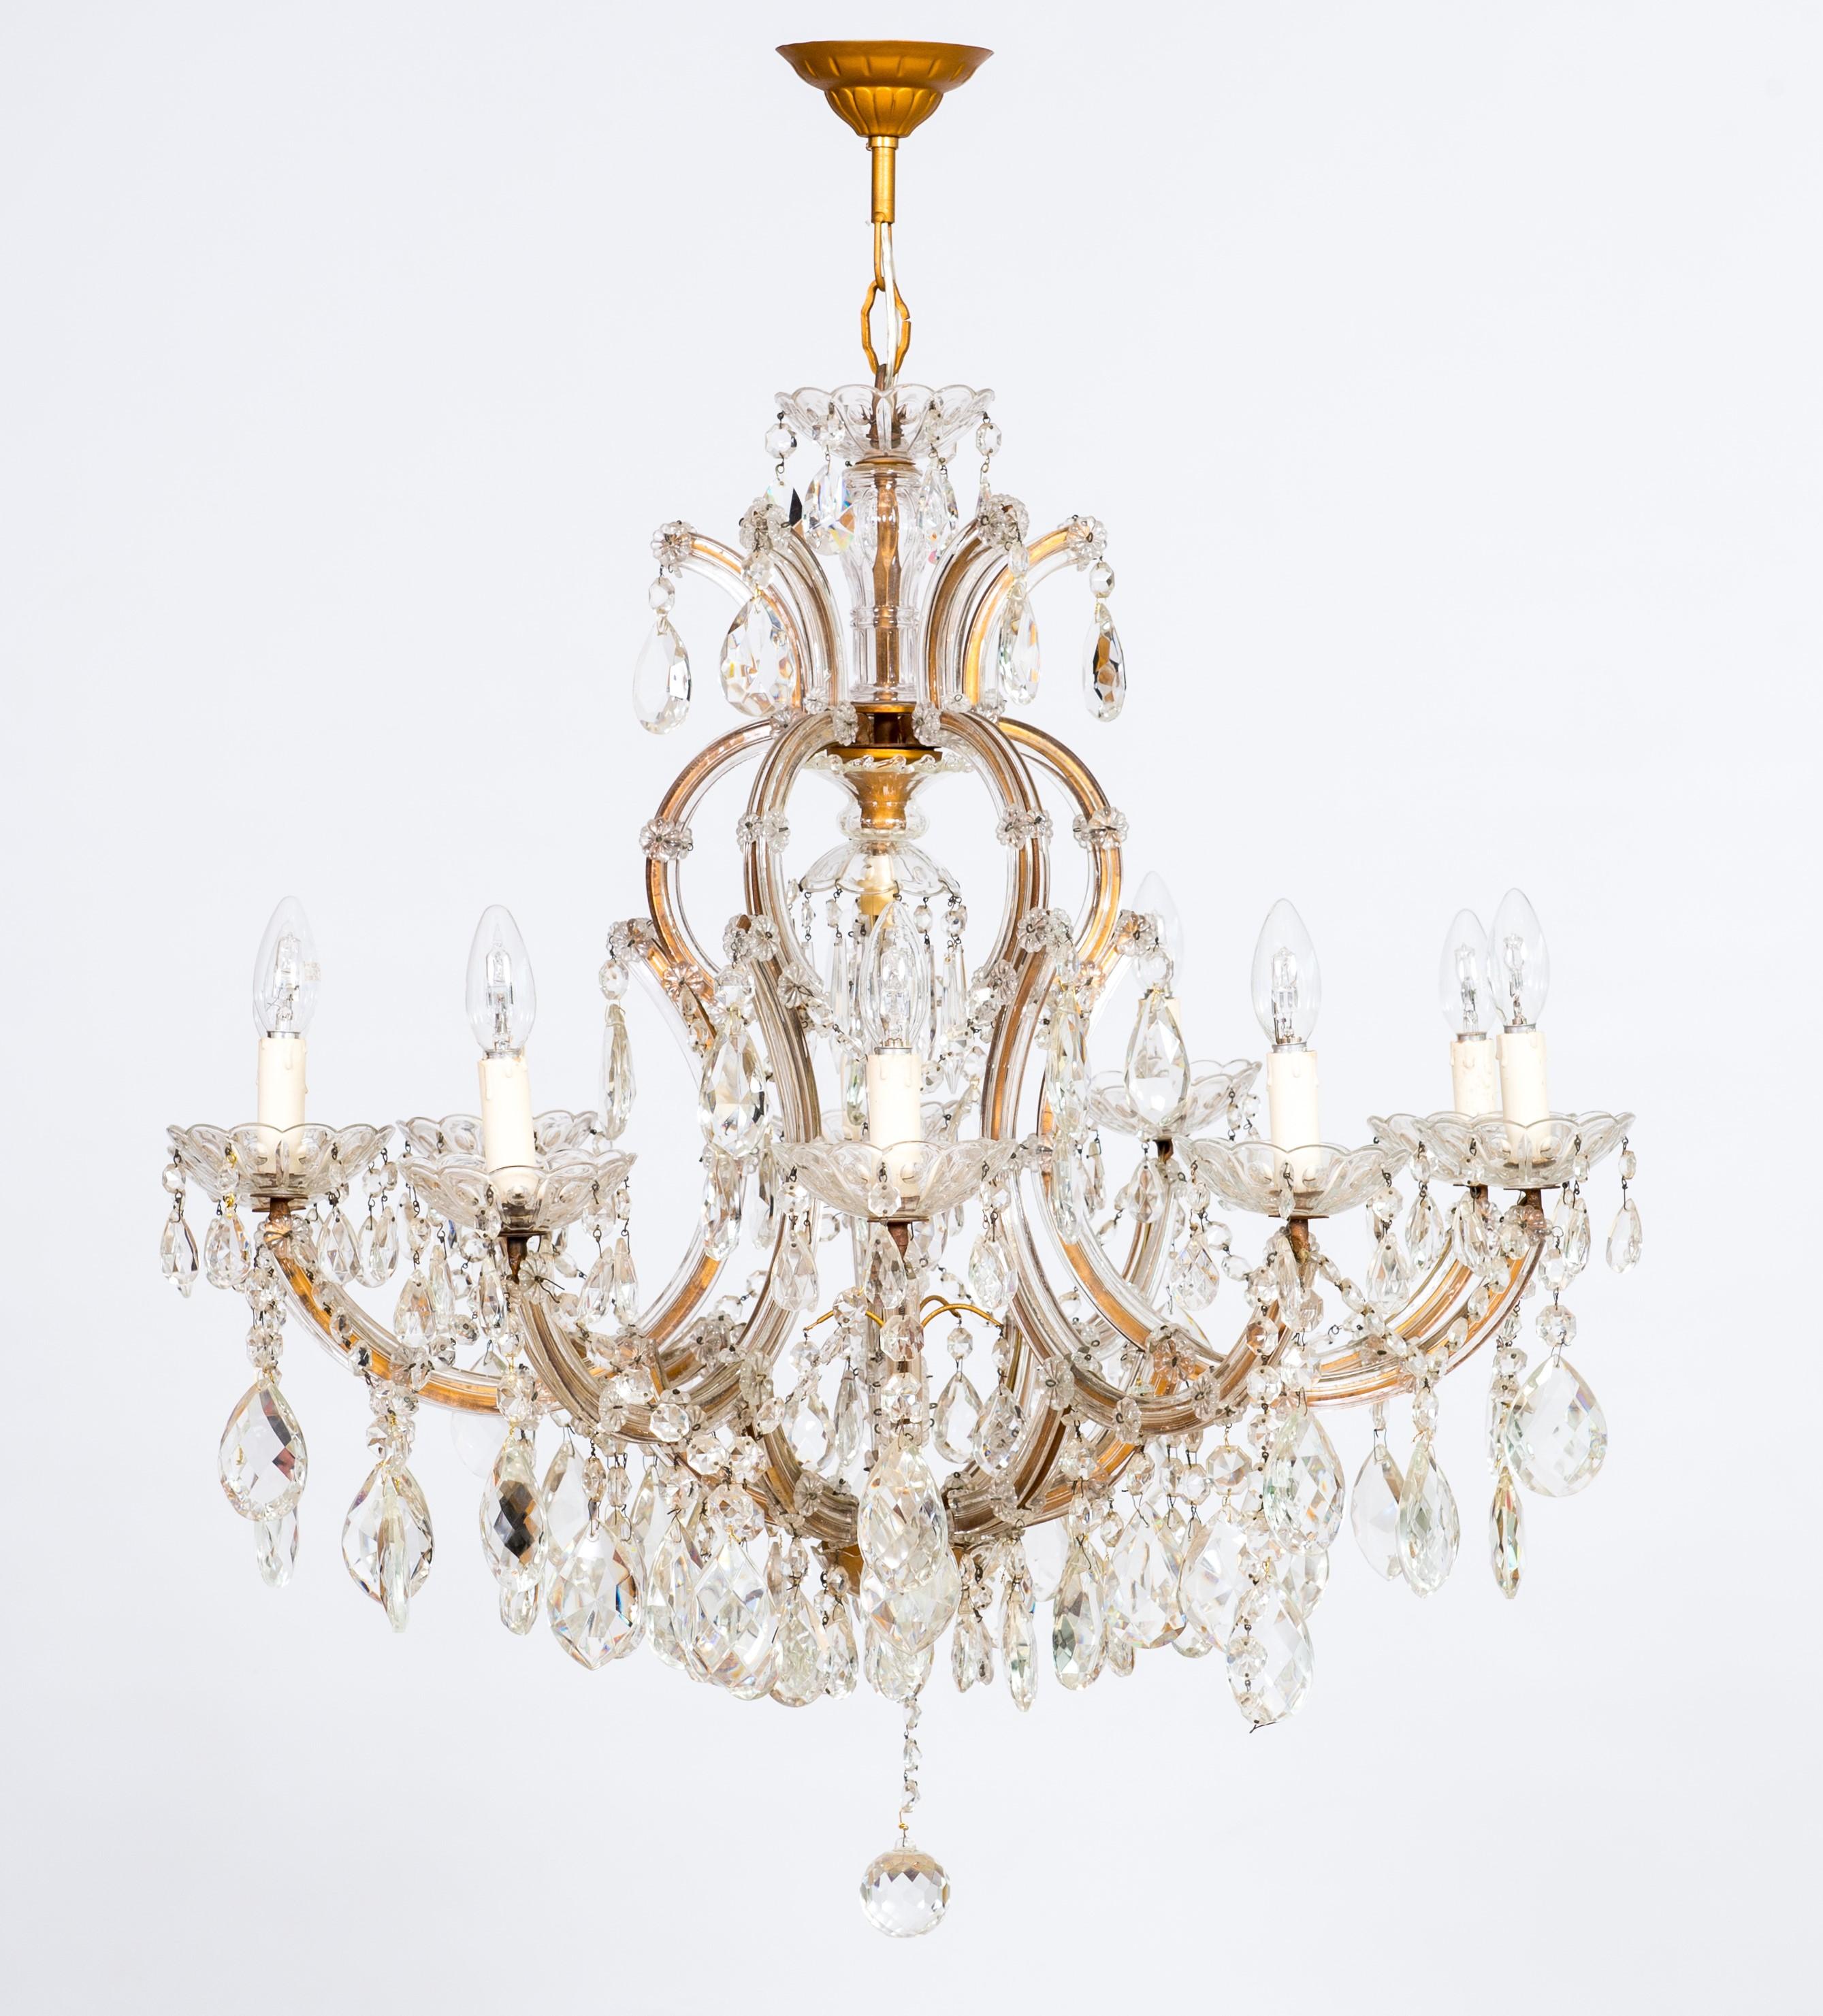 Maria Theresa chandelier in transparent Murano glass, Italy, 1930s.
This chandelier is simply astonishing. The framework is in golden iron, surrounded by transparent Murano glass. There are 11 lights and a profusion of crystal decorations,